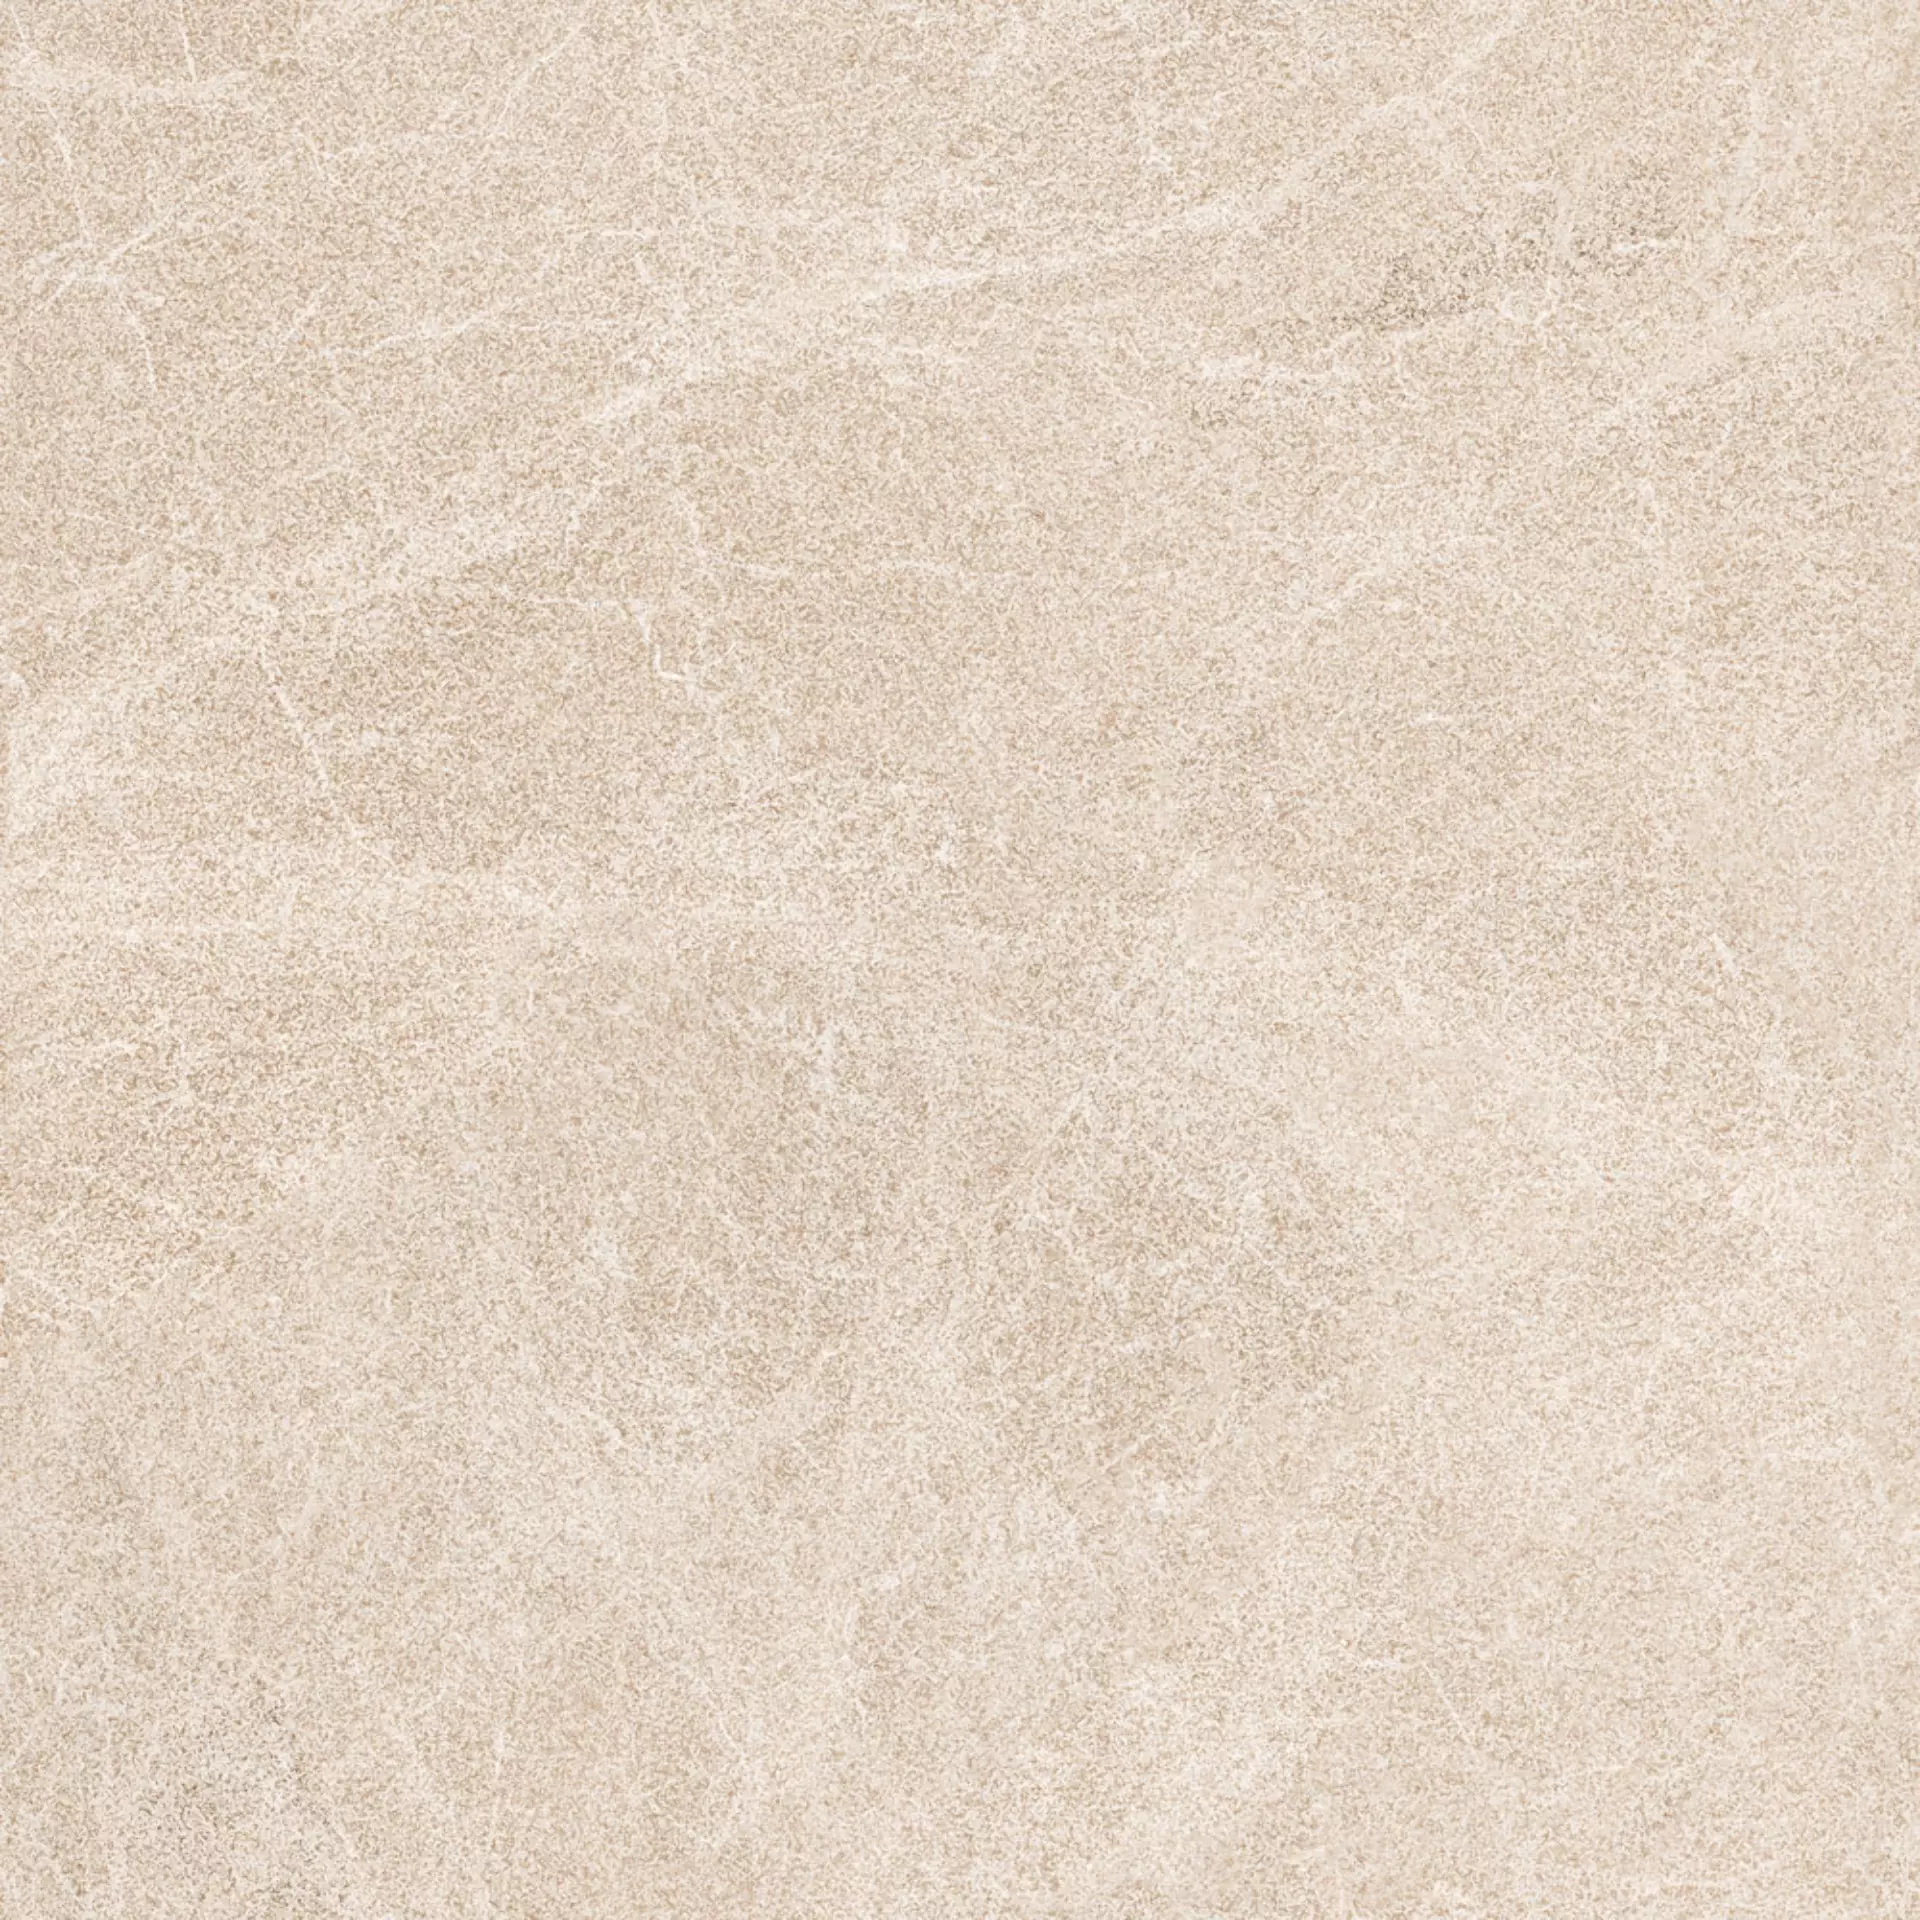 Sant Agostino Unionstone 2 Oriental Beige Natural CSAORBE660 60x60cm rectified 10mm